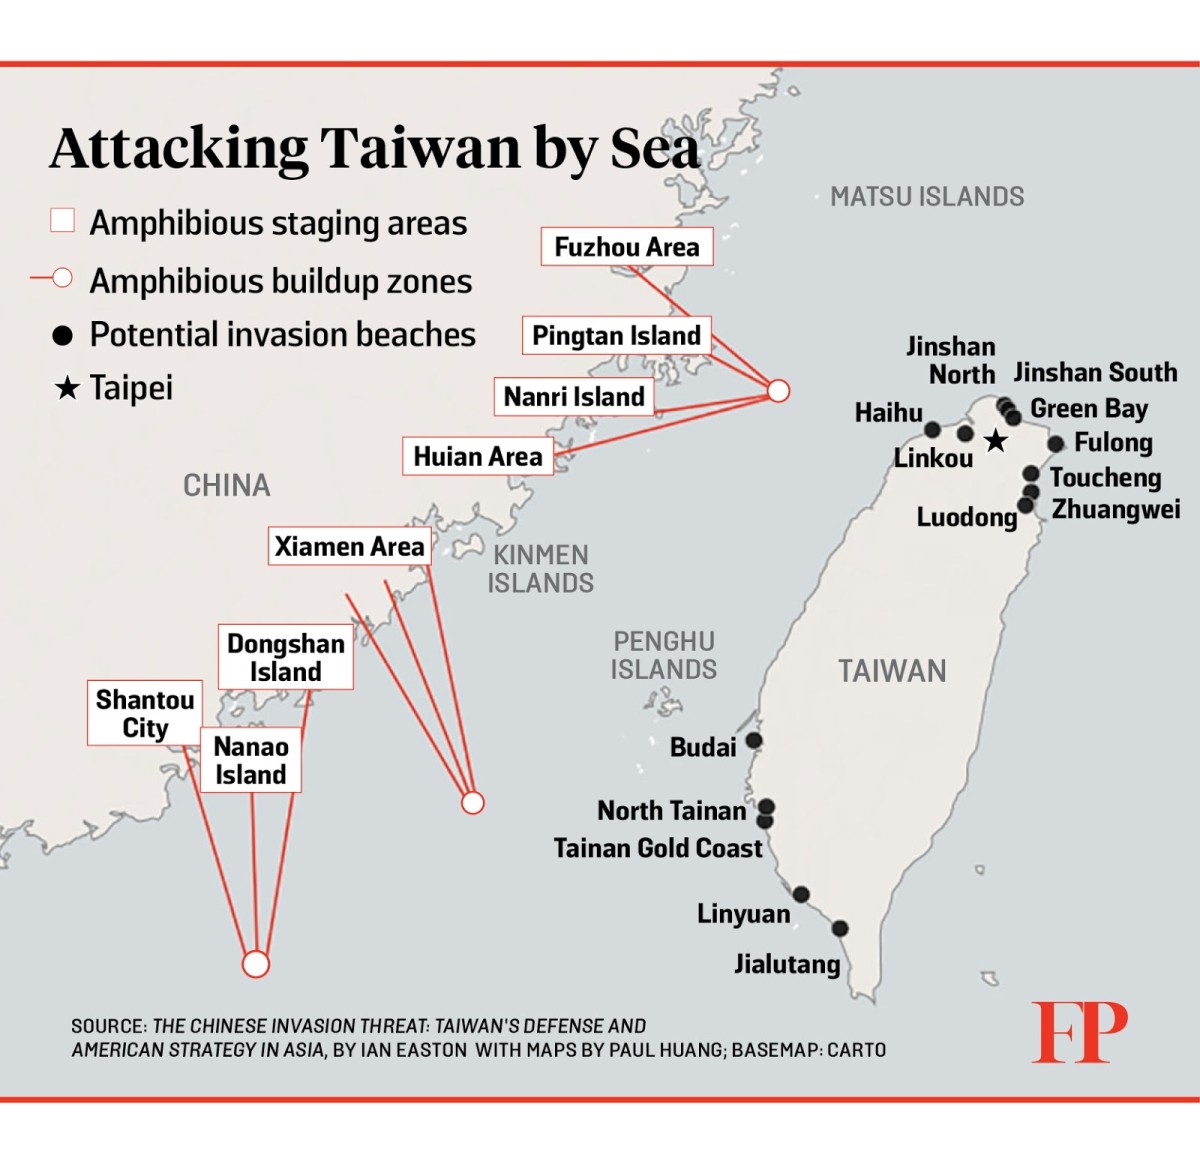 Will China Attack Taiwan? Is There a Justification for It?